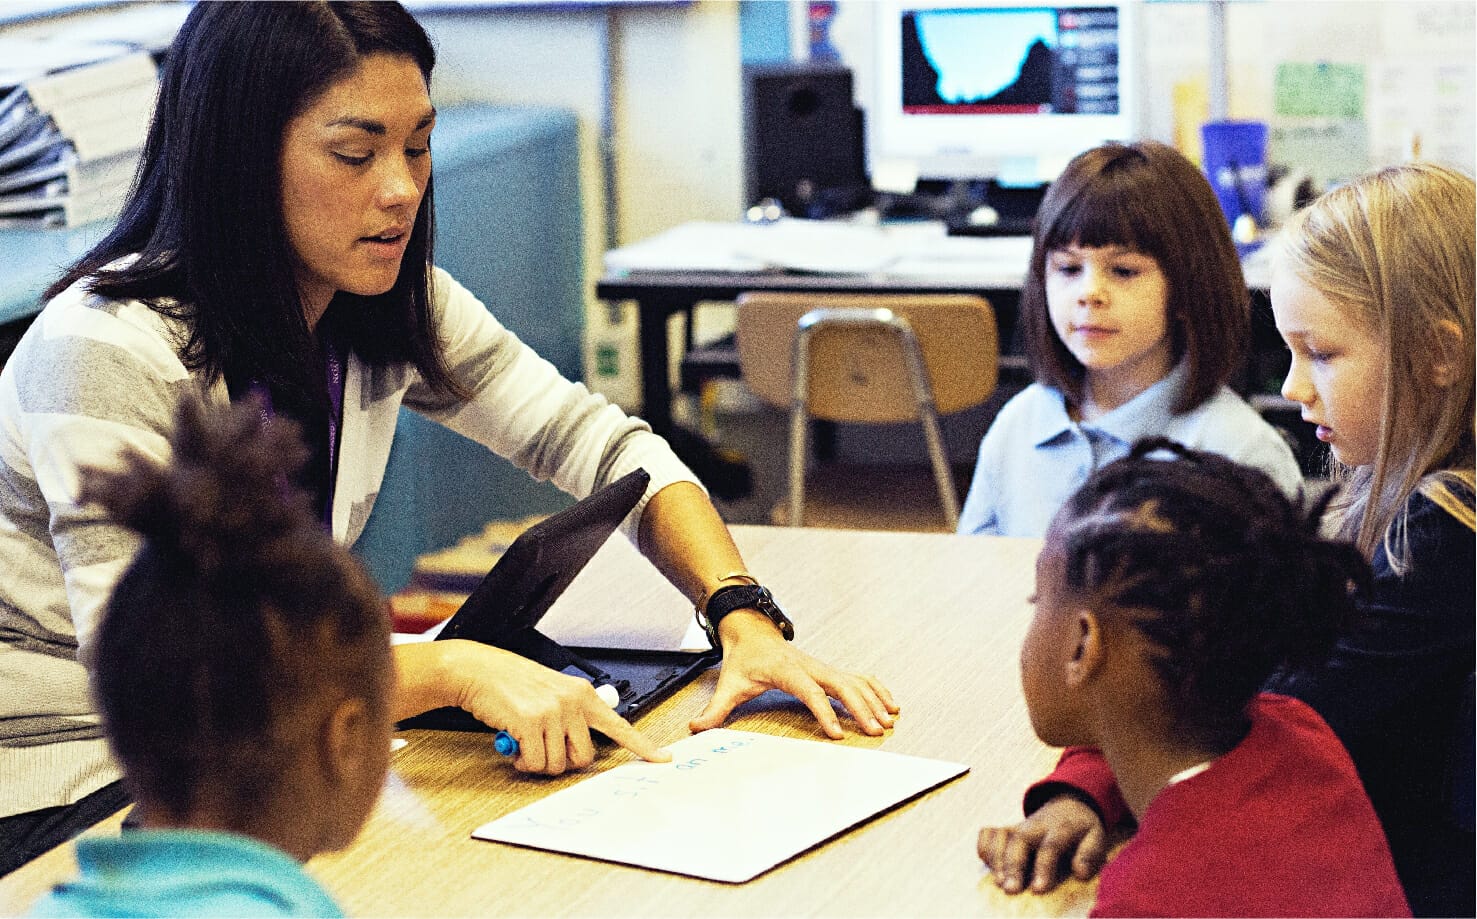 A teacher working with four students around a table